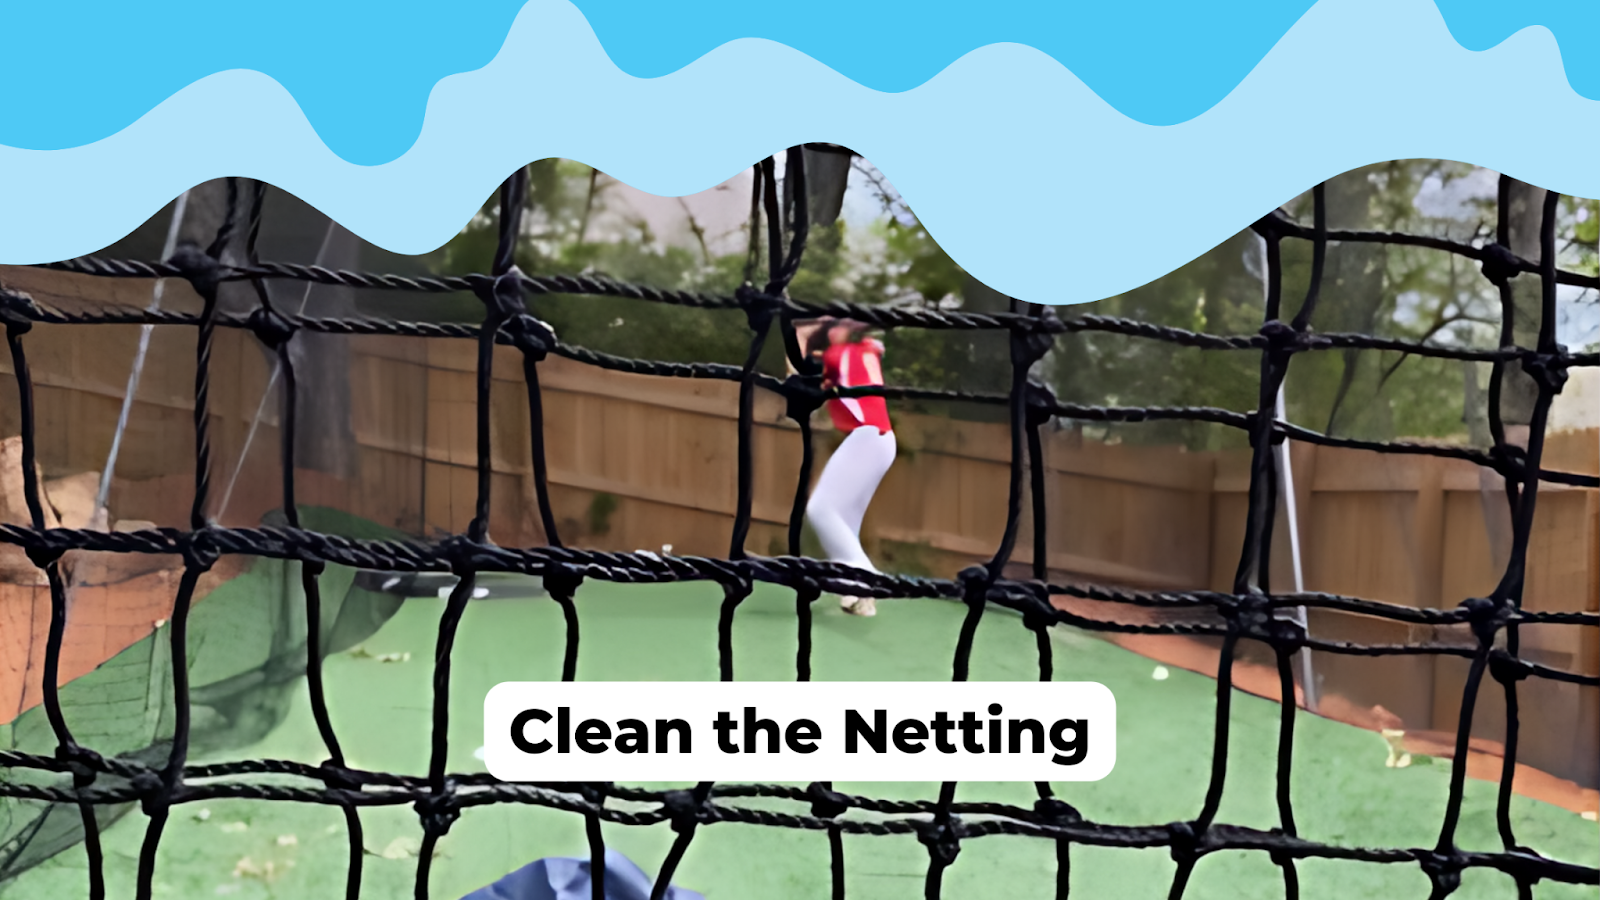 An image directing to clean the netting